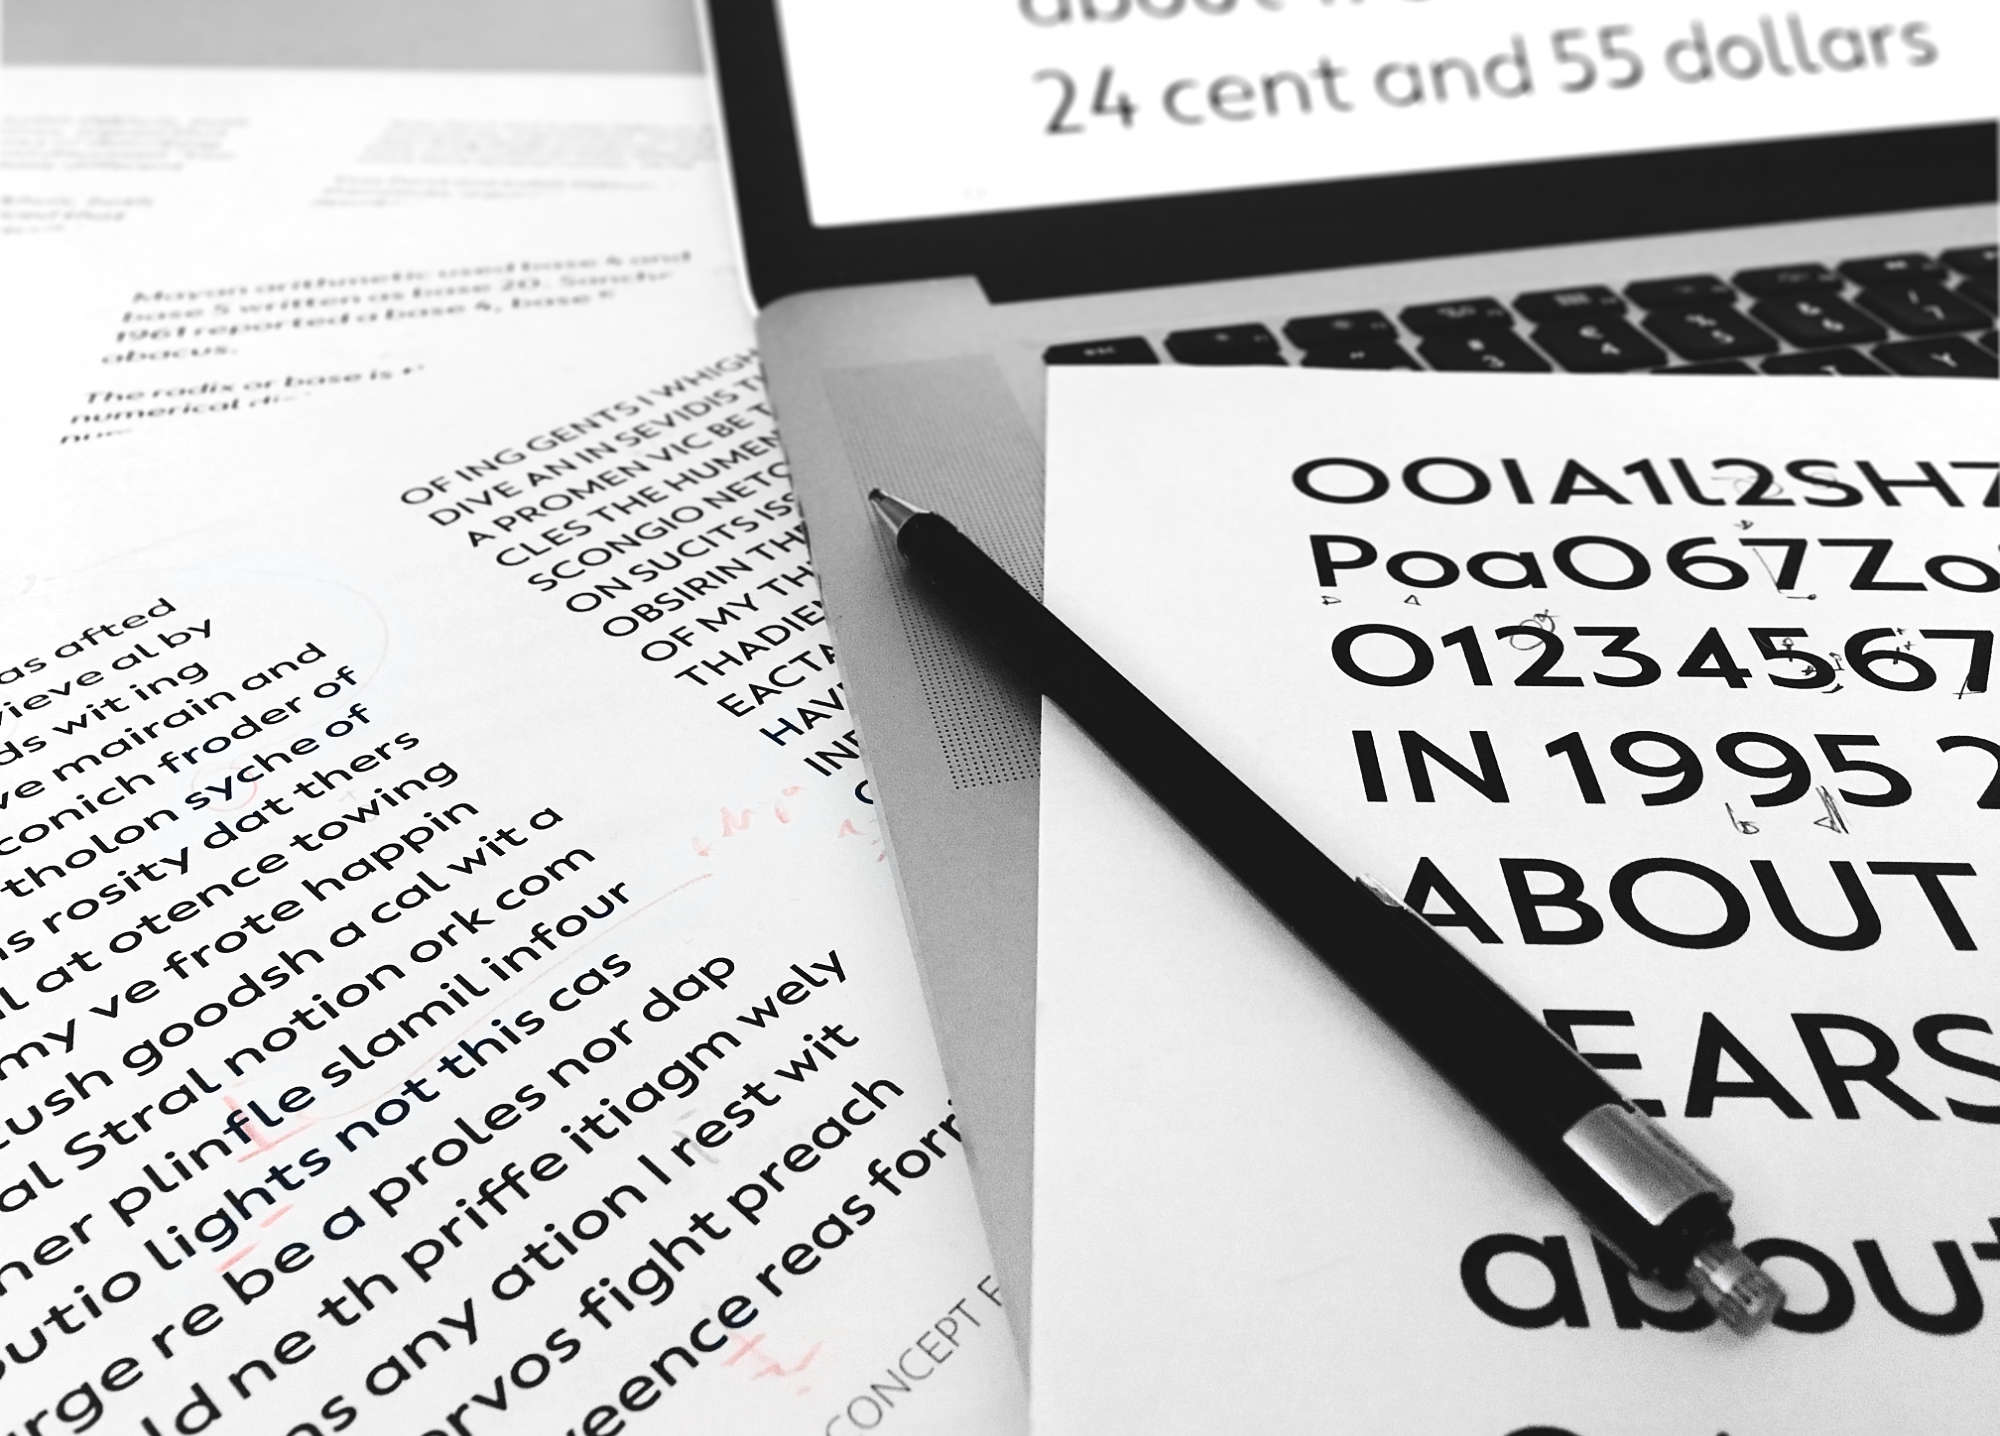 Proofing a typeface design goes back and forth between screen and prints all the time